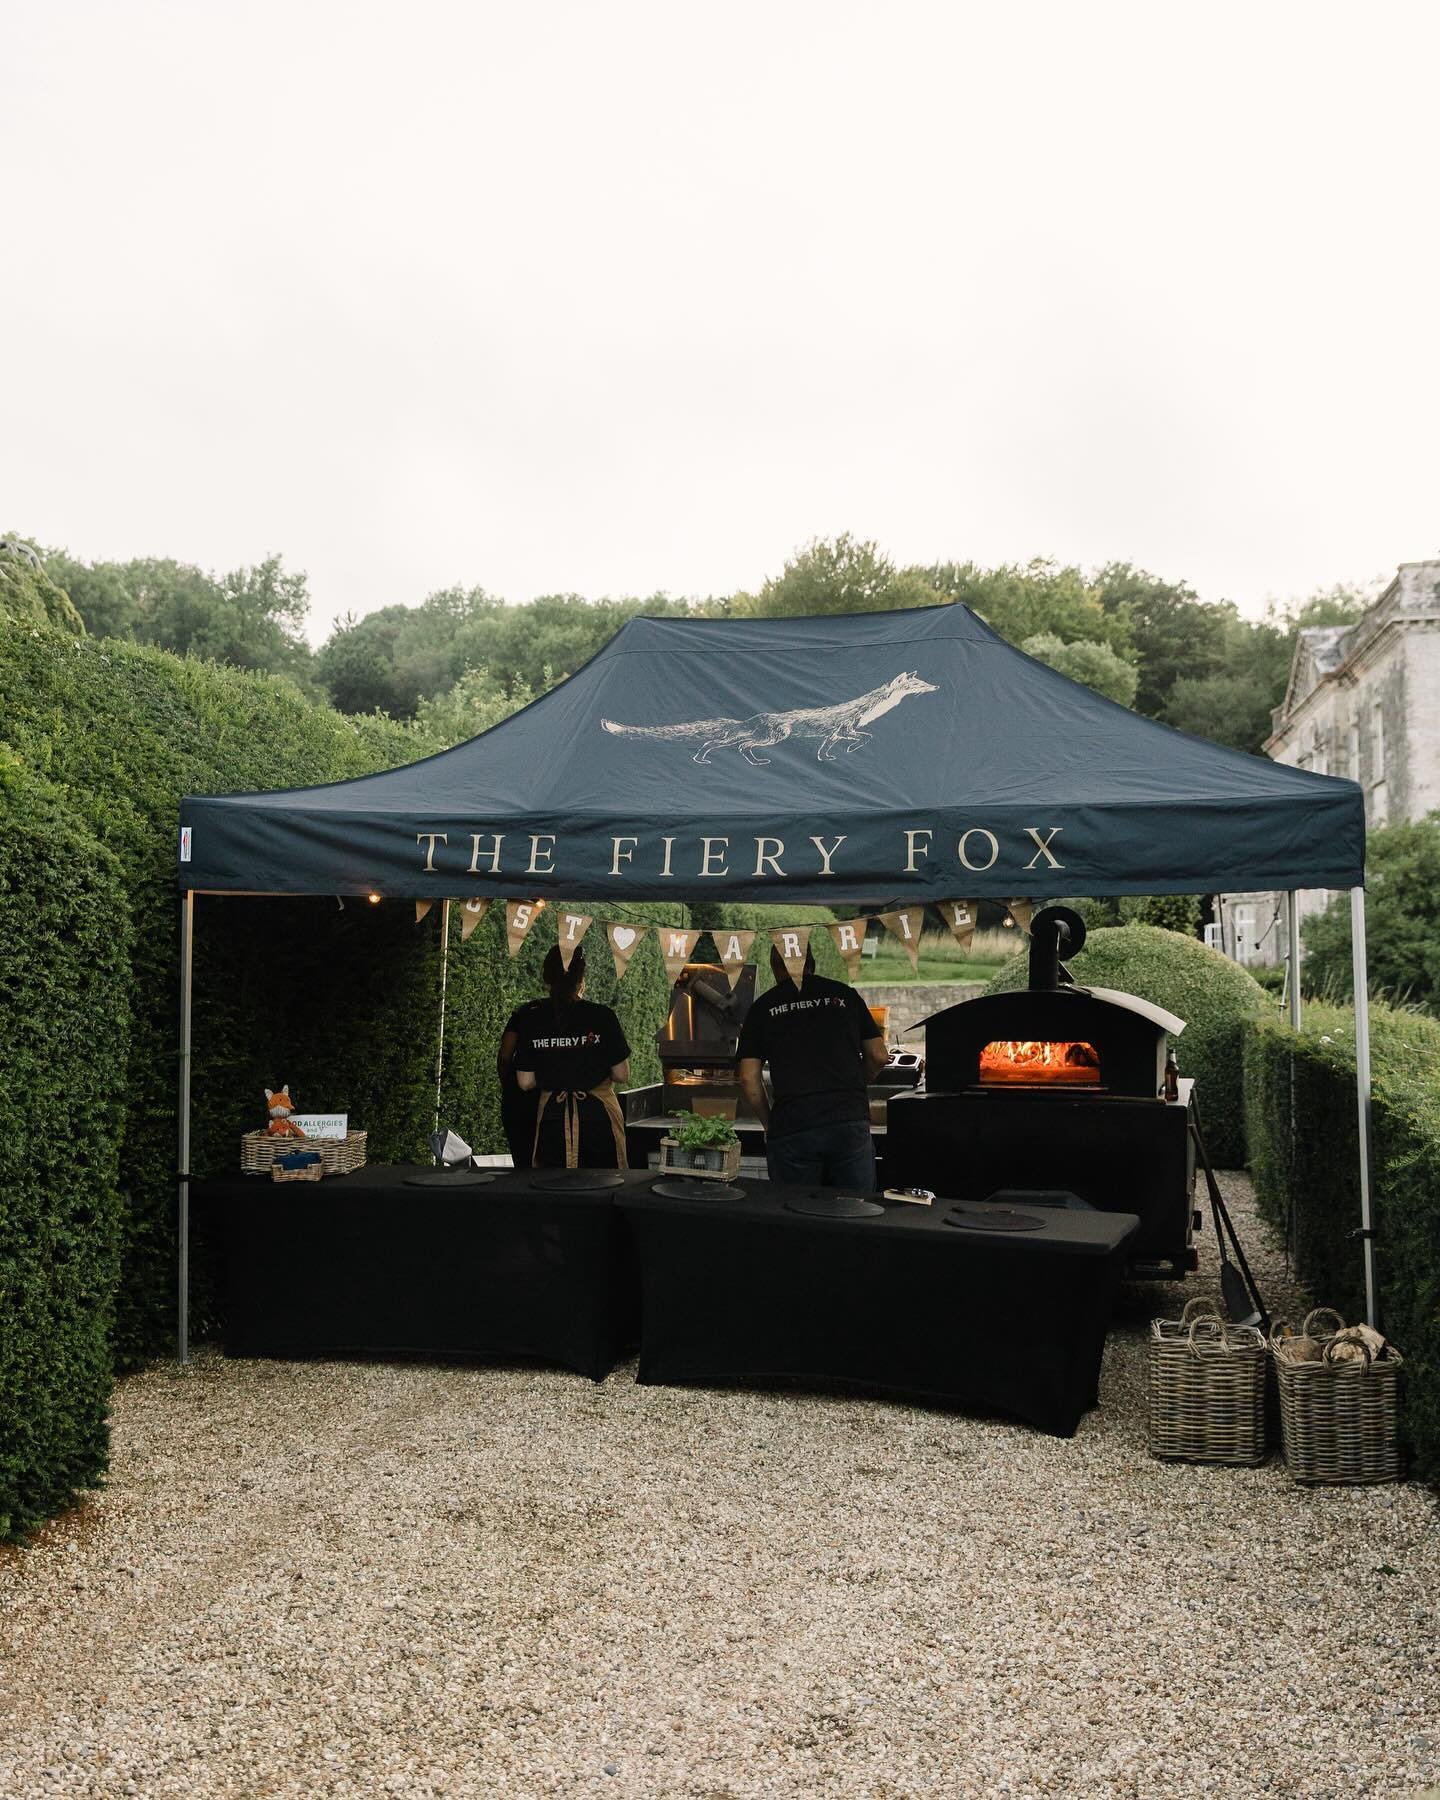 We are delighted to be back at @camehousedorset today for their Showcase 🤍 The last time we were here was for my (Sophie&rsquo;s) wedding - swipe to see the wedding party enjoying our popular buffet style pizza service 🍕

We look forward to meeting